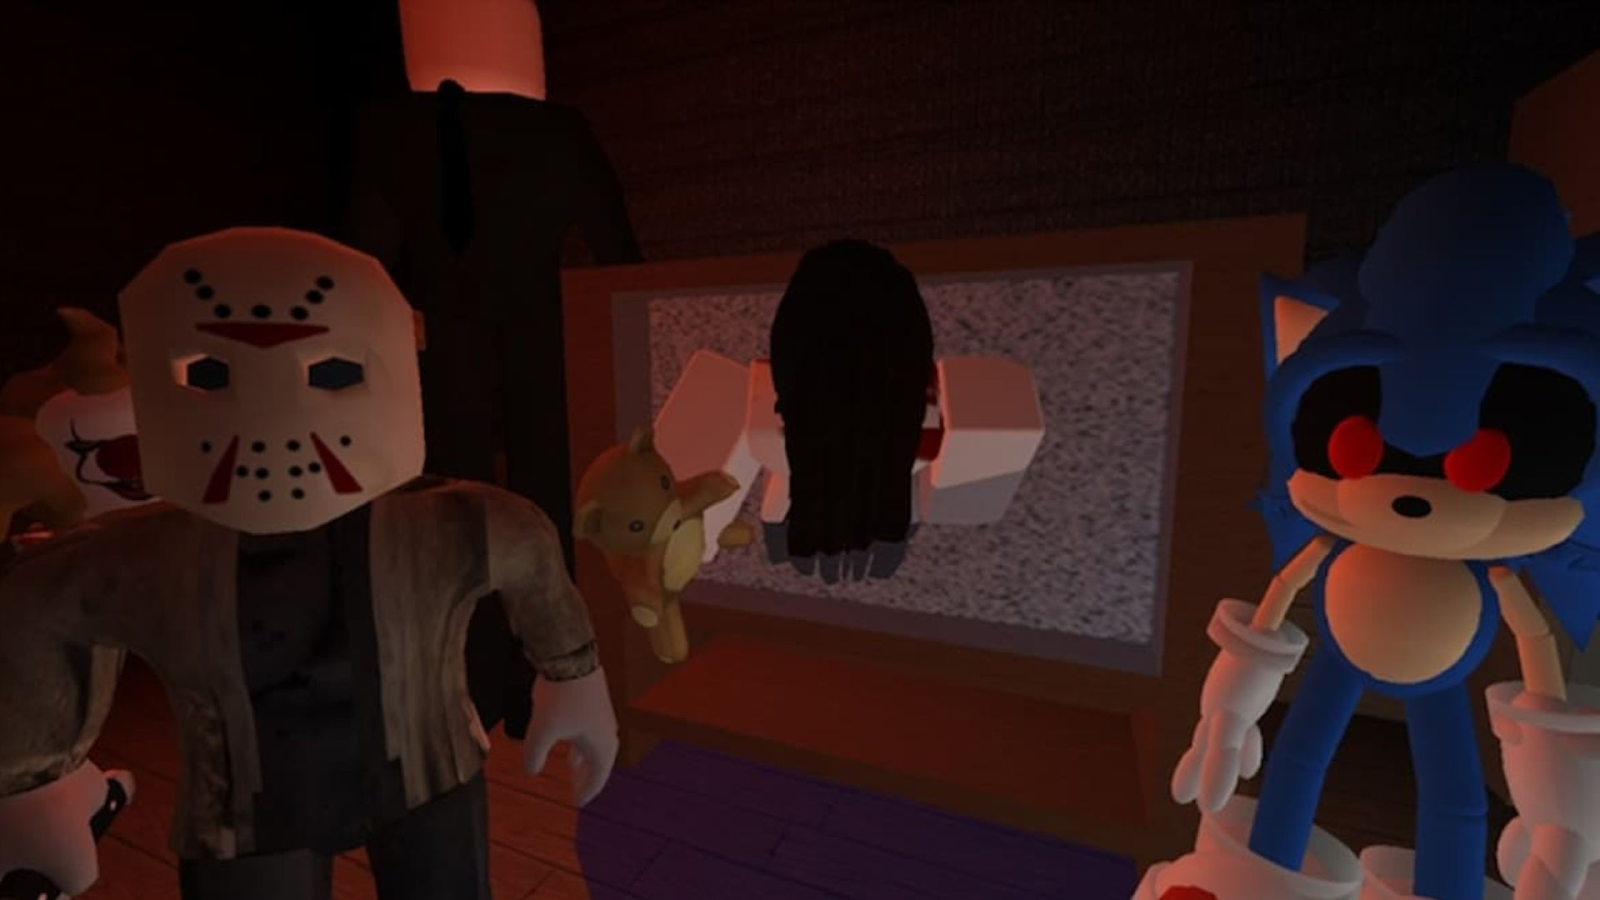 Scary Roblox Games  Games roblox, Roblox, Scary games to play